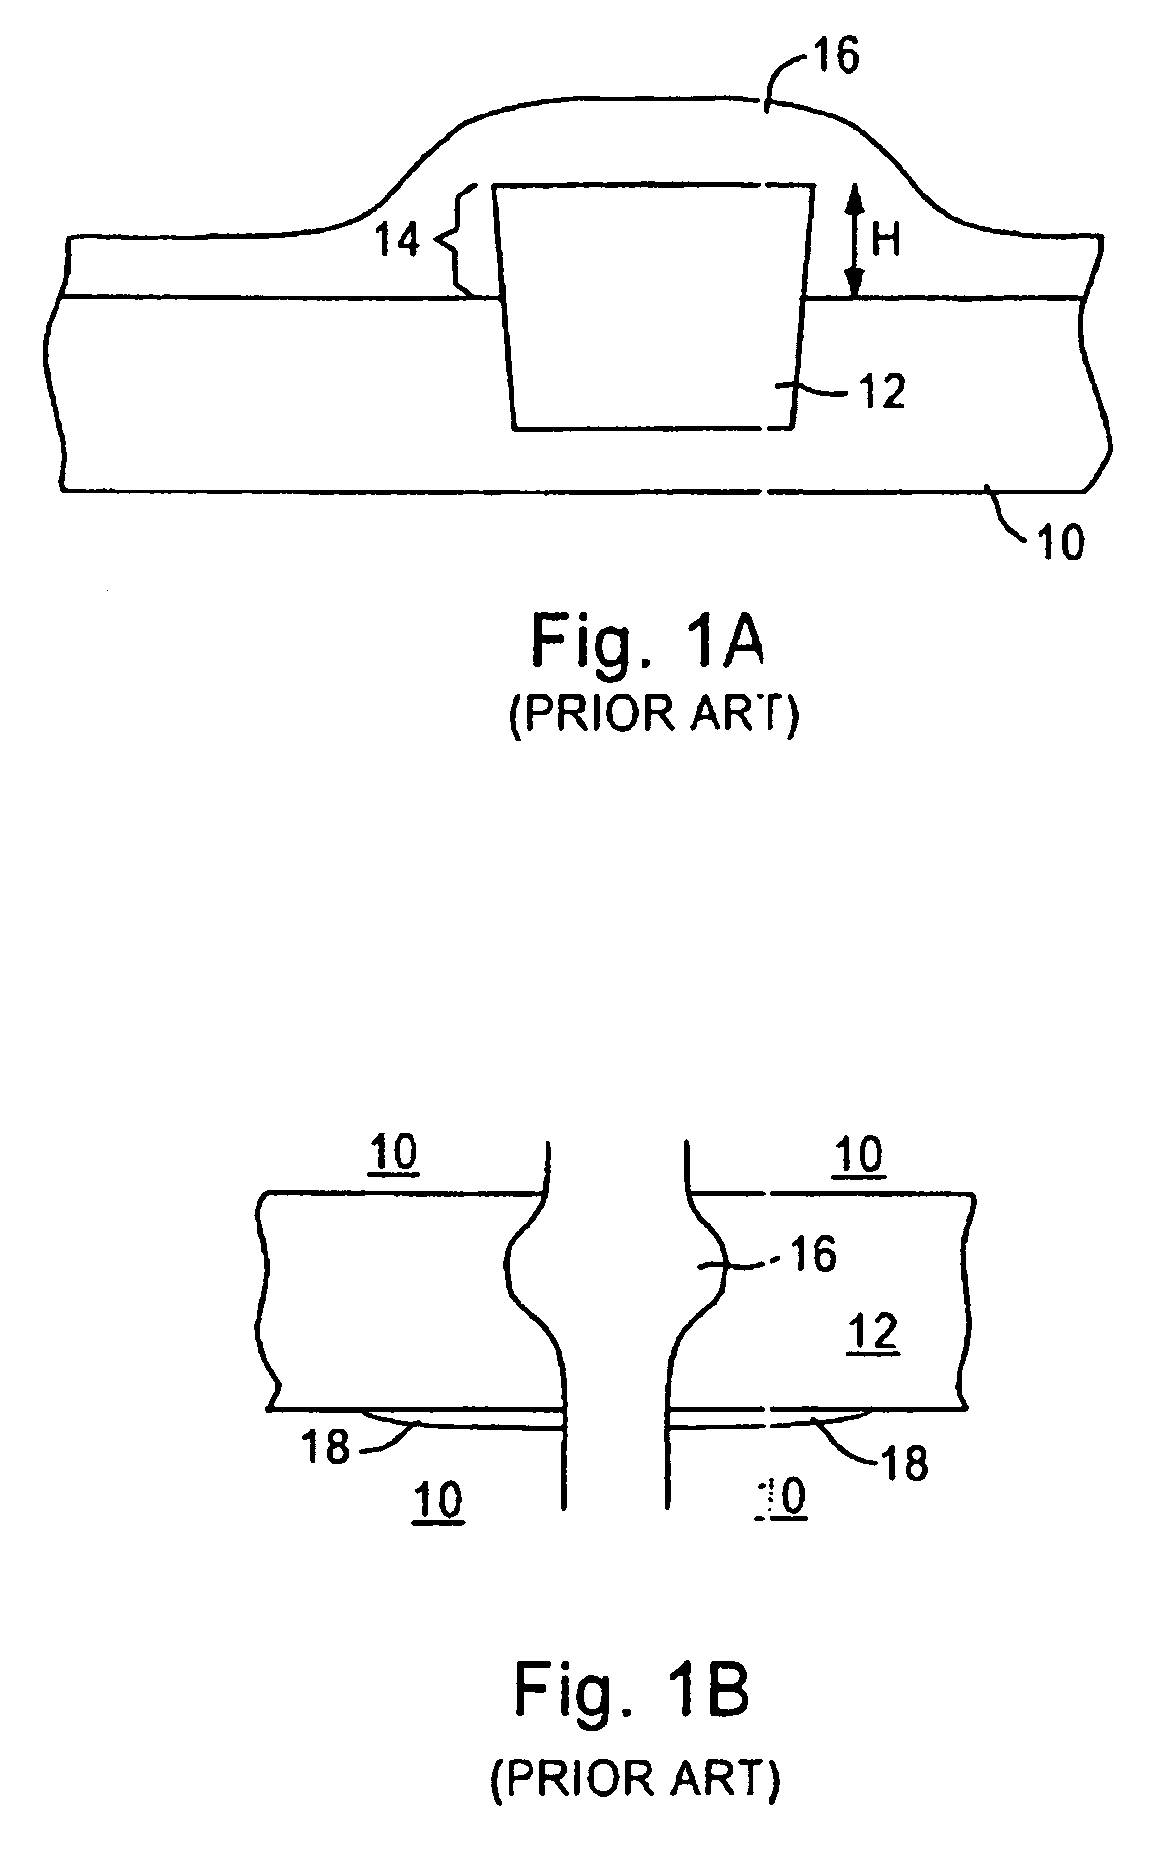 Method of forming a semiconductor arrangement with reduced field-to active step height